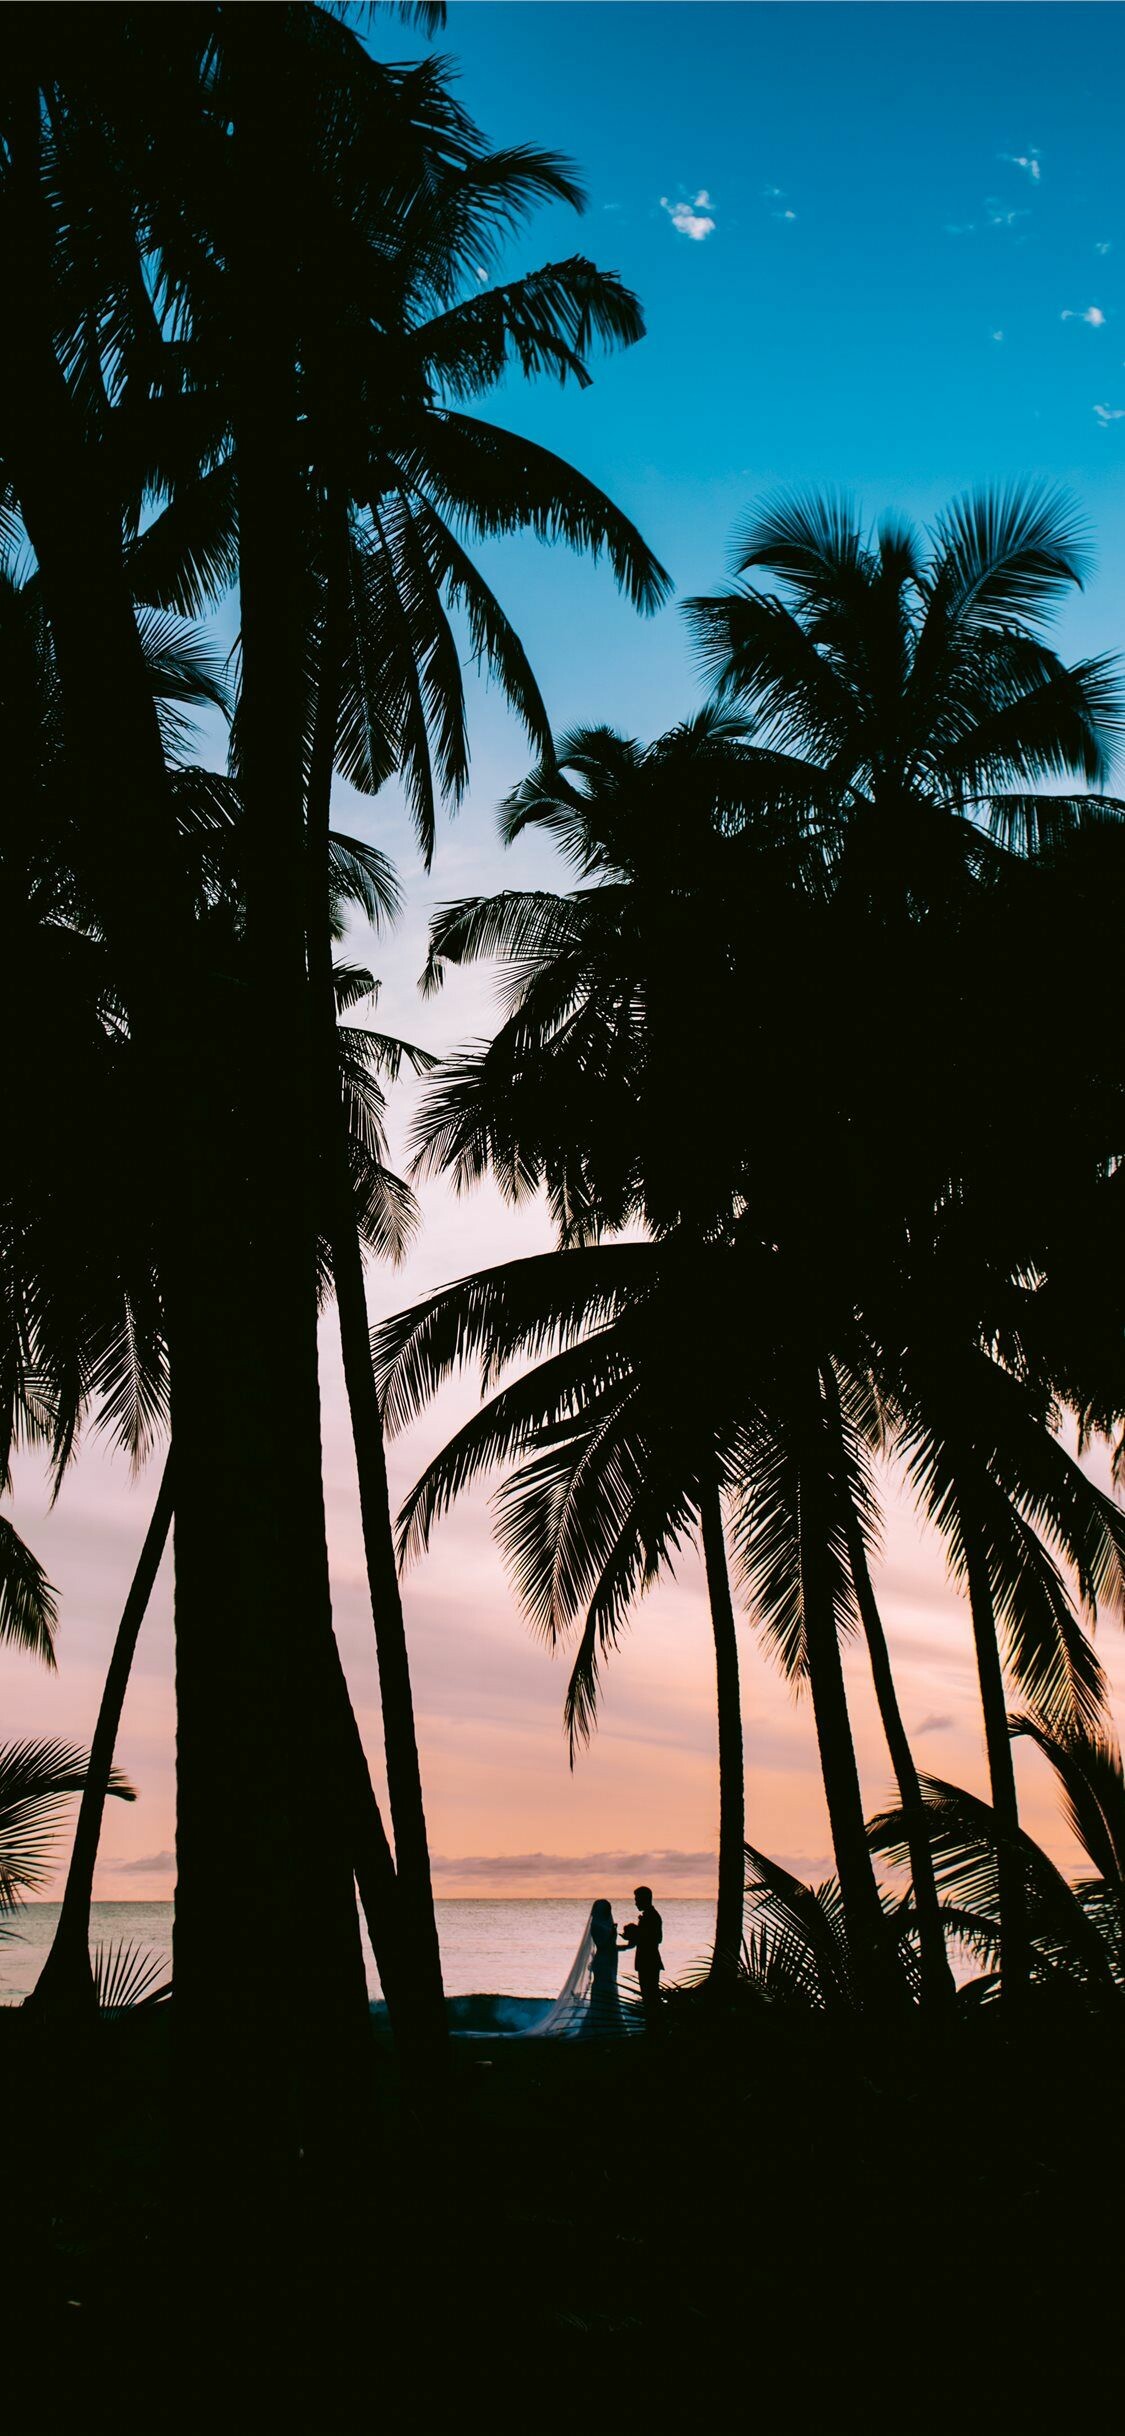 Palm Tree: Trees that are synonymous with tropical beaches, warm sunny climates. 1130x2440 HD Wallpaper.